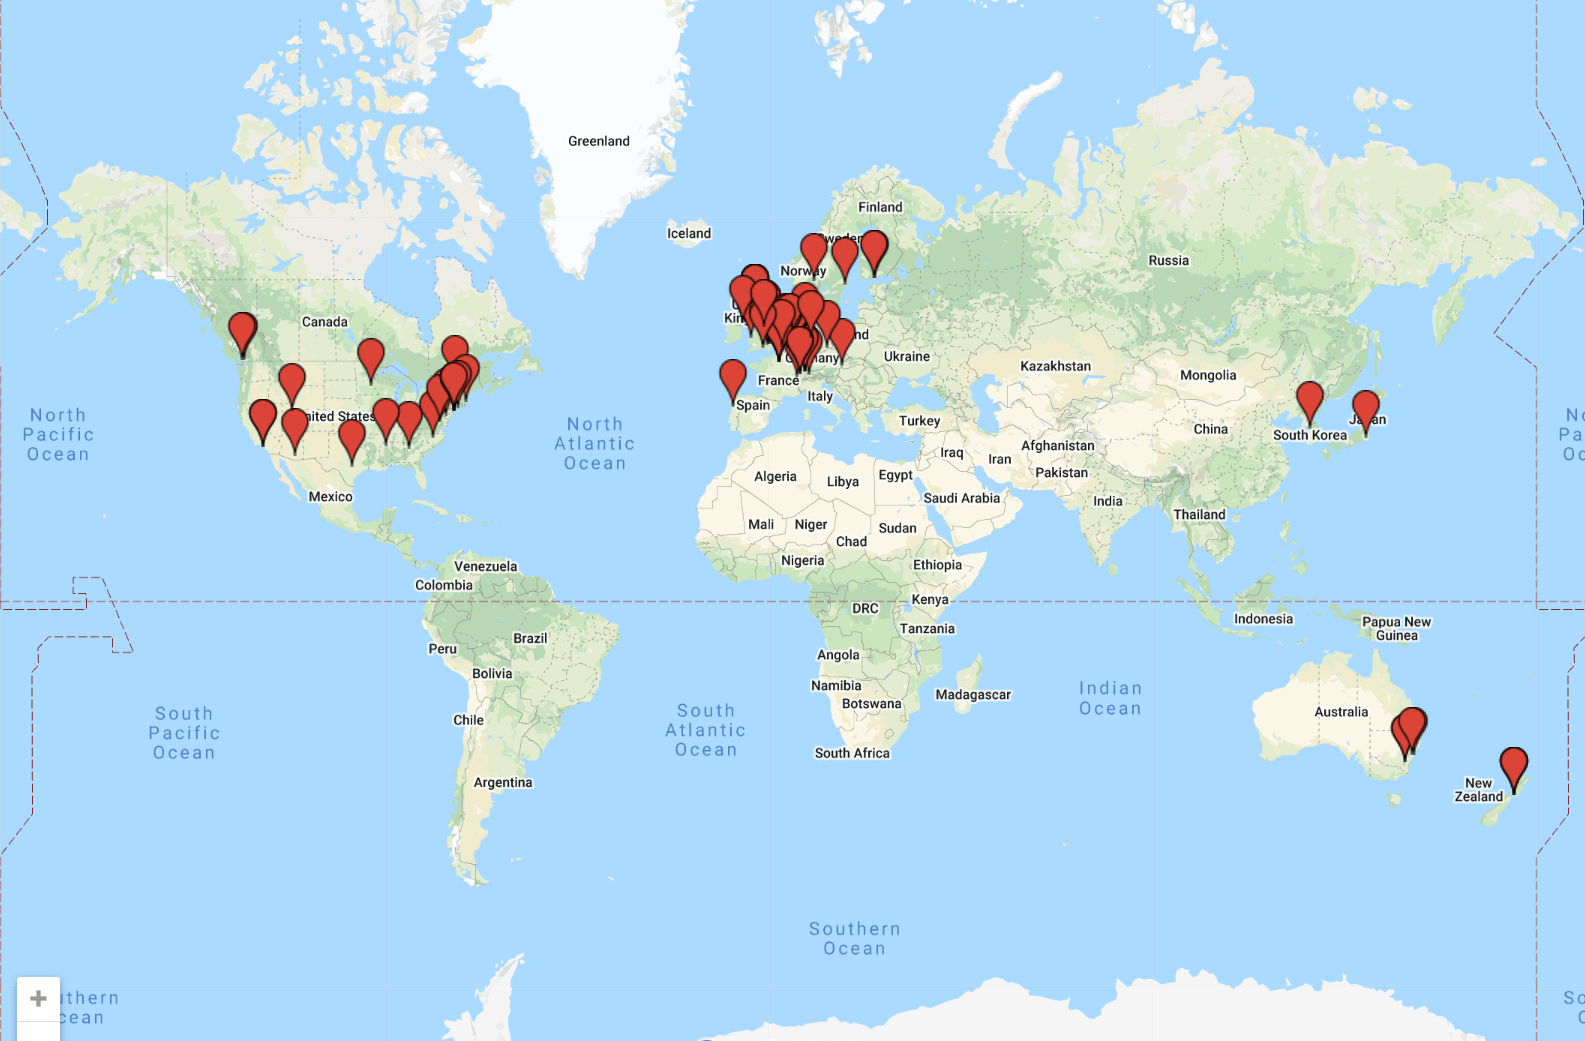 This is our PRONOM Contributor Map. We would like to take a moment to thank everyone for their efforts - far and wide.